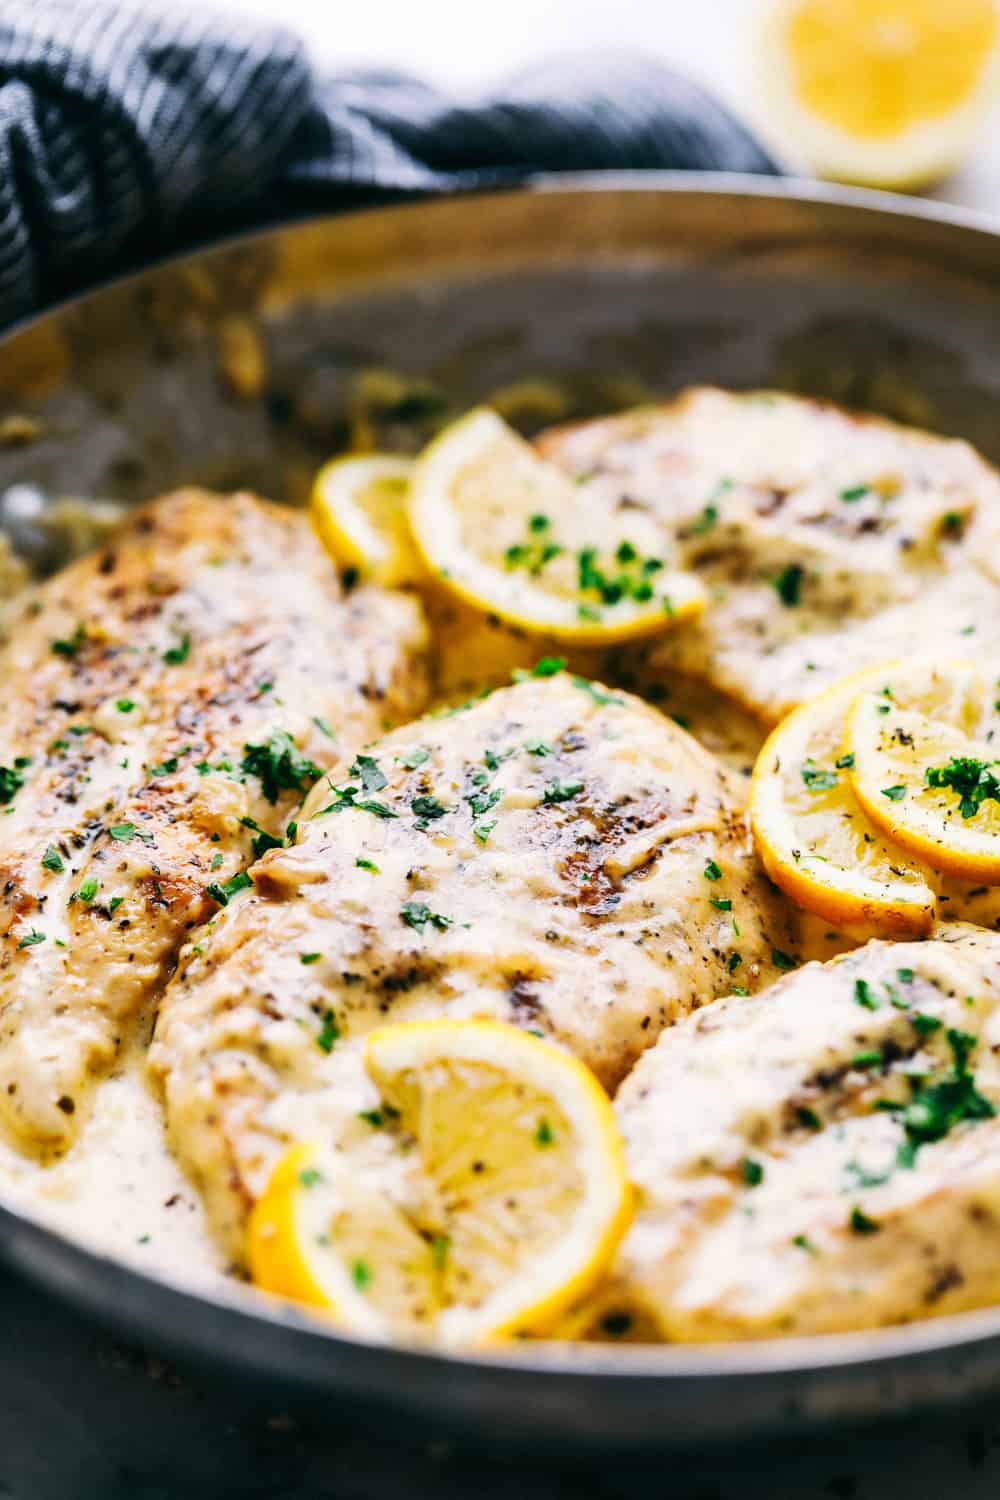 Creamy Lemon Parmesan Chicken The Recipe Critic,Wall Art Sayings For Bedroom